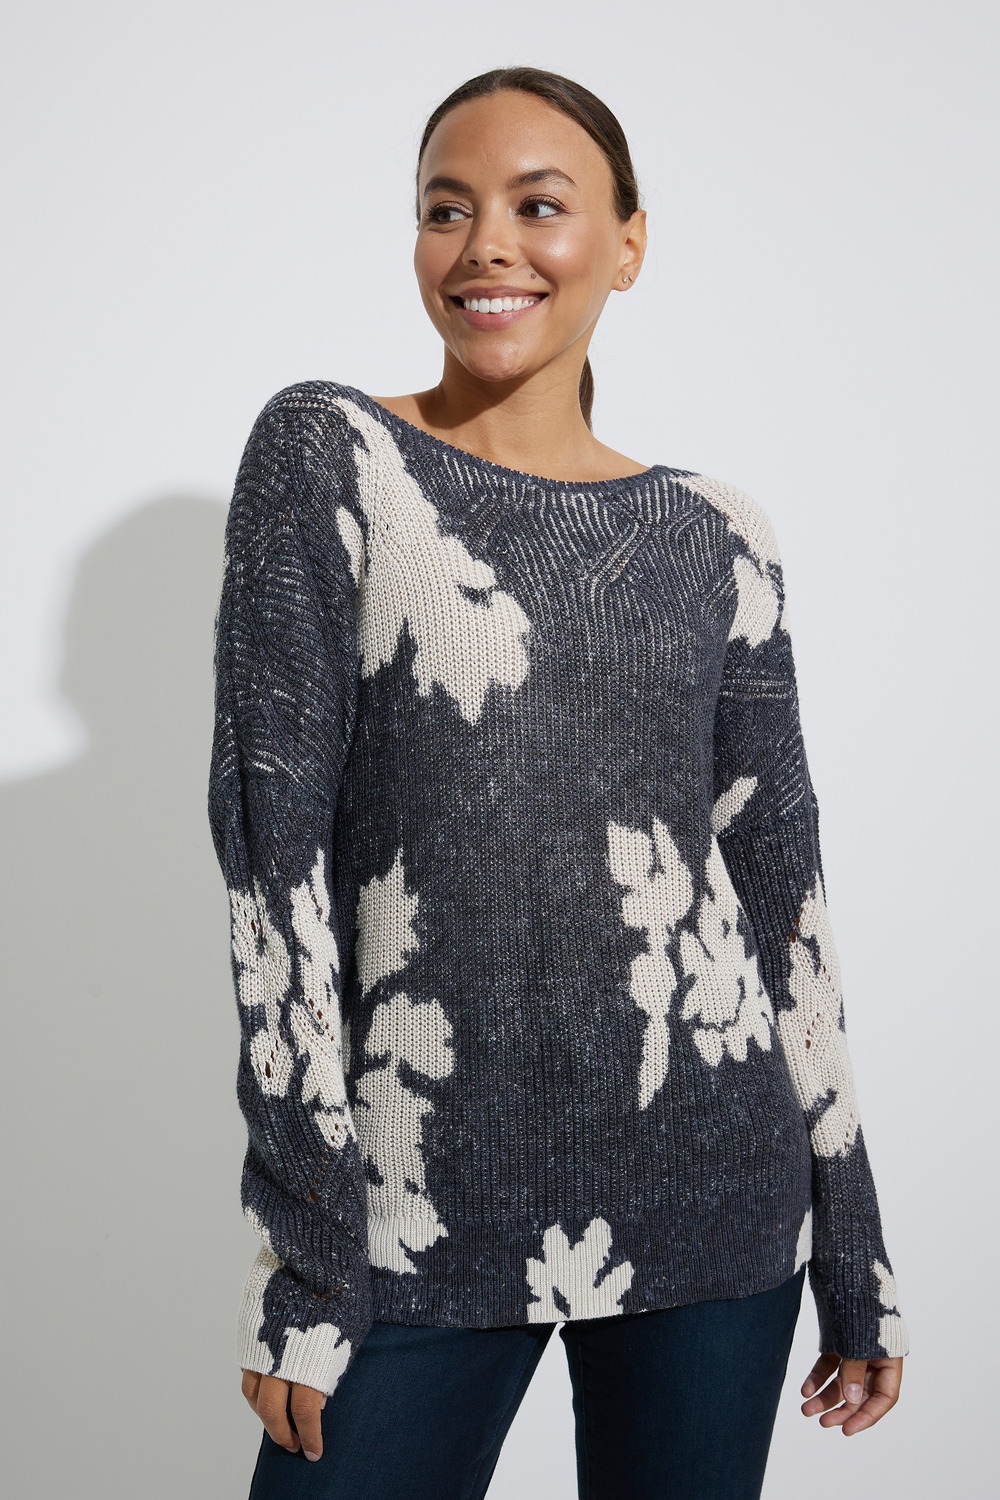 Scattered Florals Sweater Style F221141. Black/multi